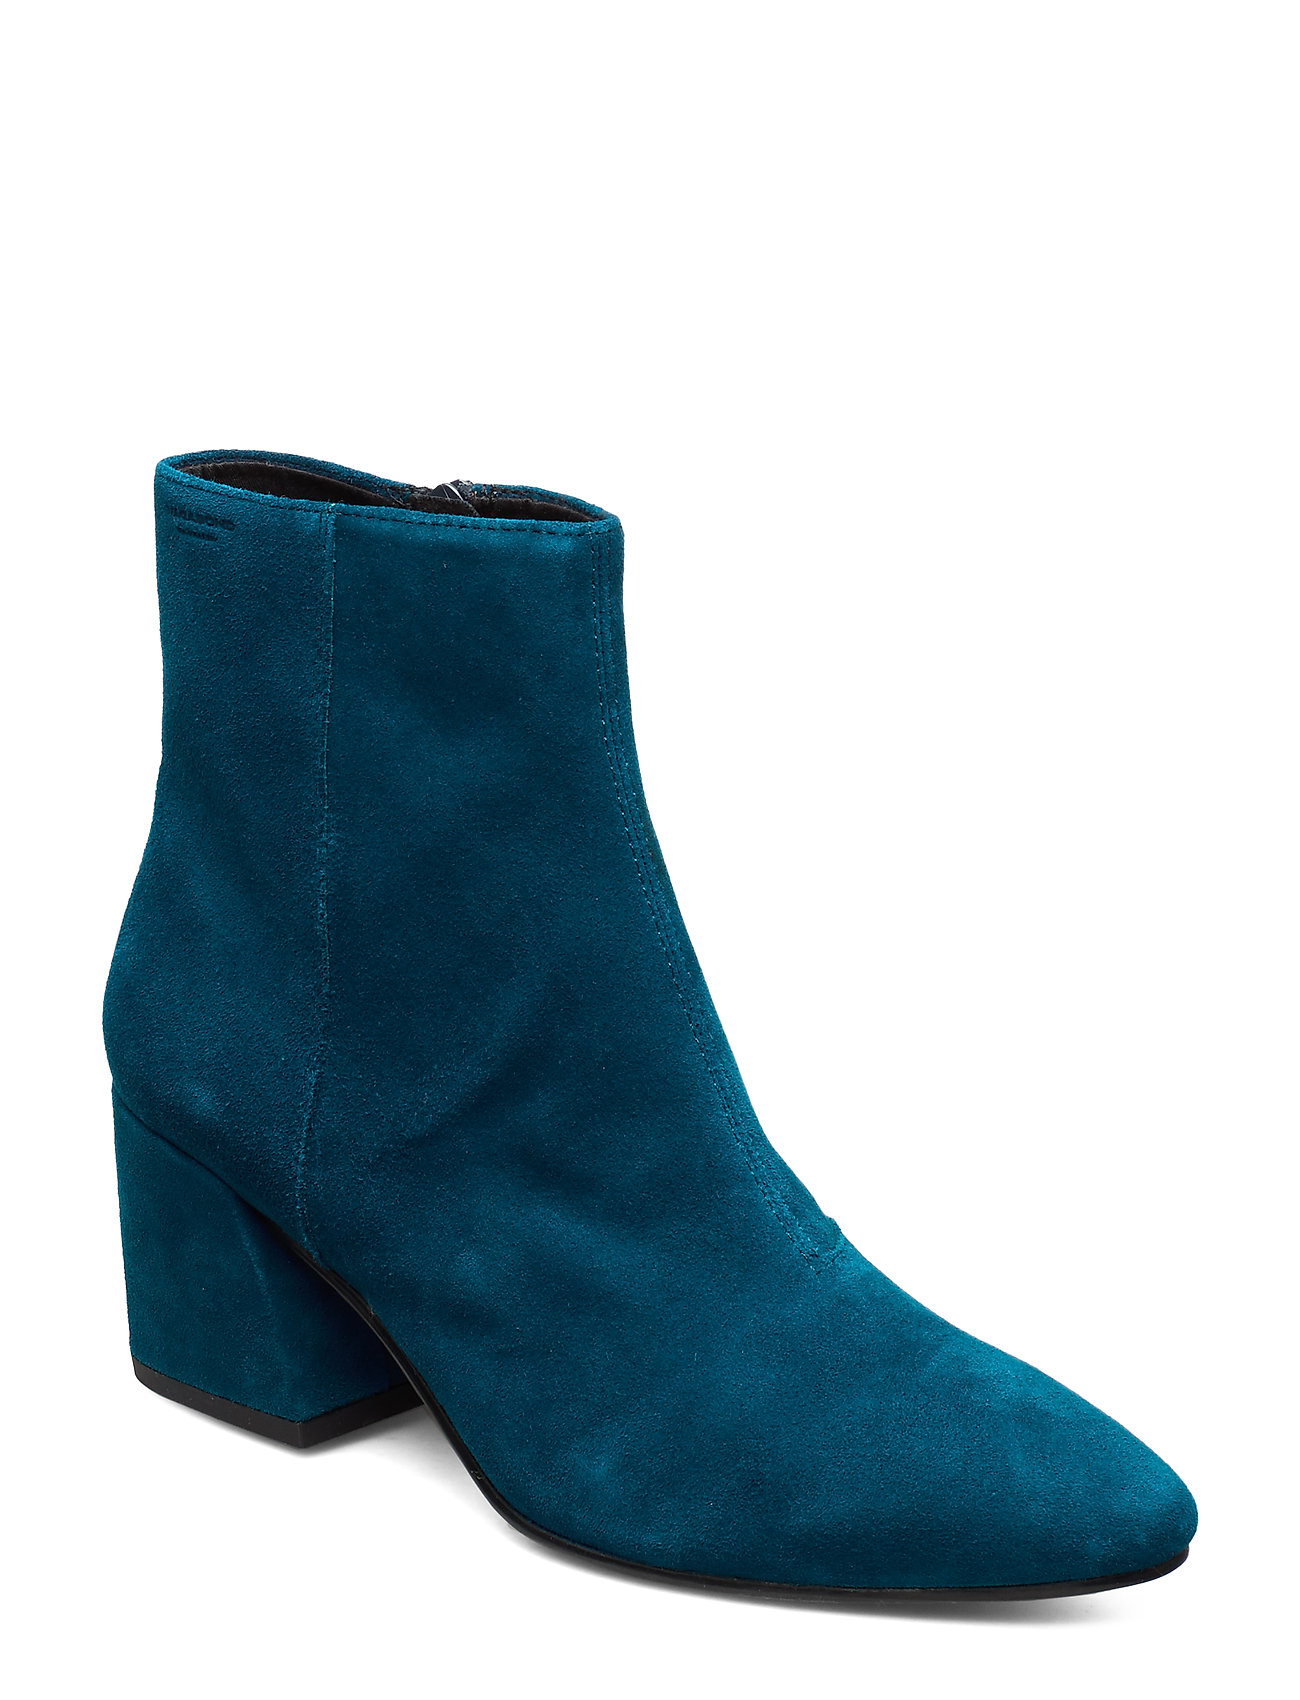 Olivia Shoes Boots Ankle Boots Ankle Boot - Heel Sininen VAGABOND